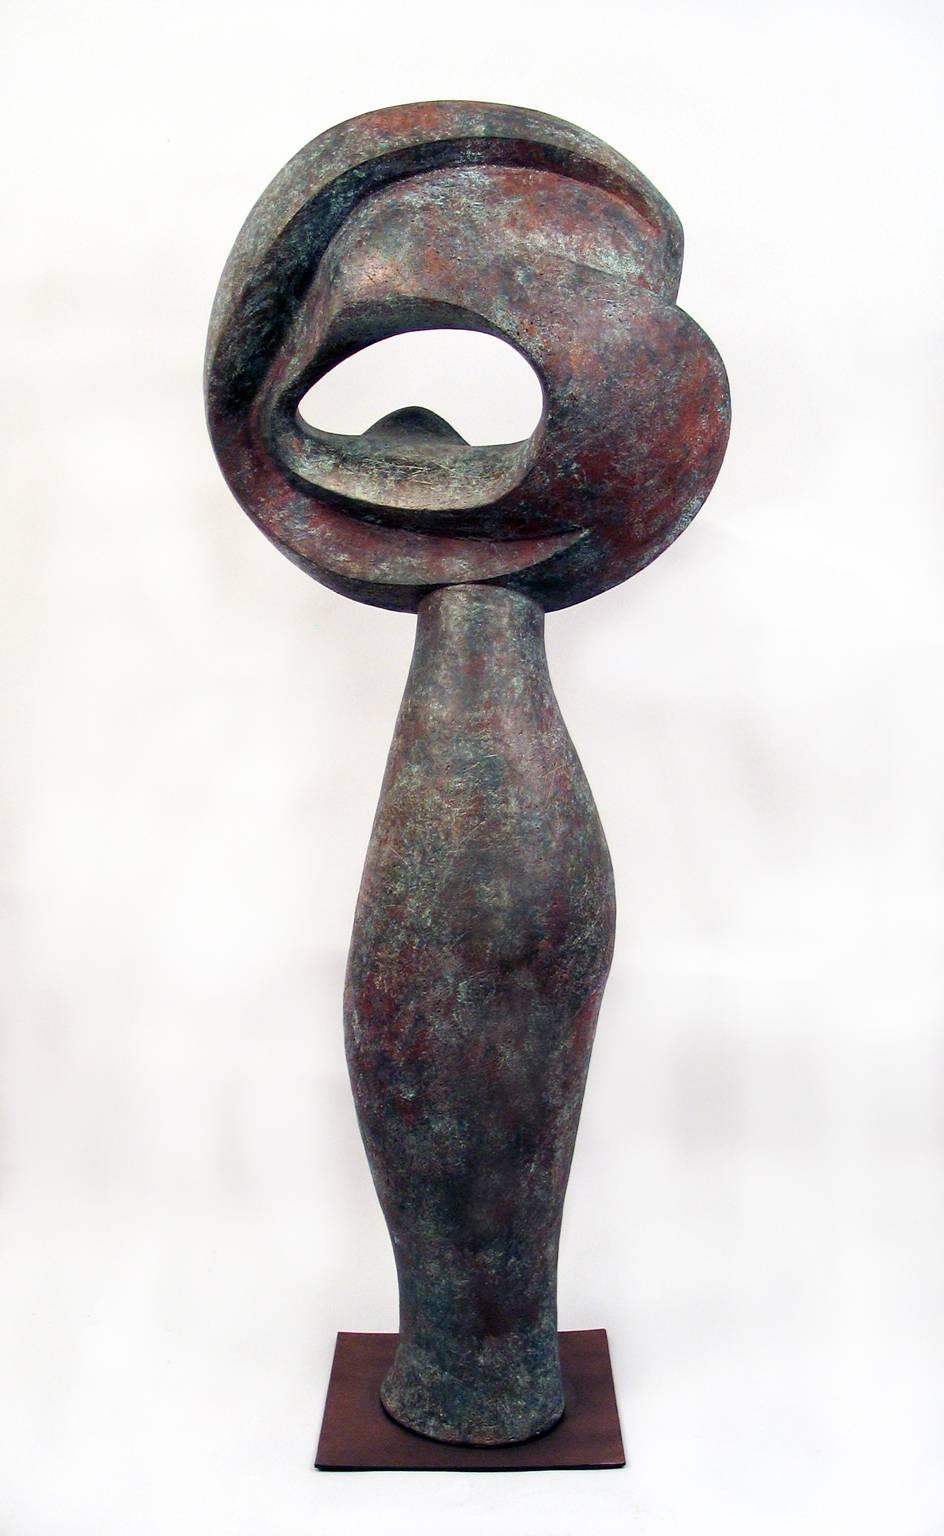 “Eye to the Future”, tall ceramic sculpture, with a weathered bronze finish - Sculpture by Elaine Lorenz